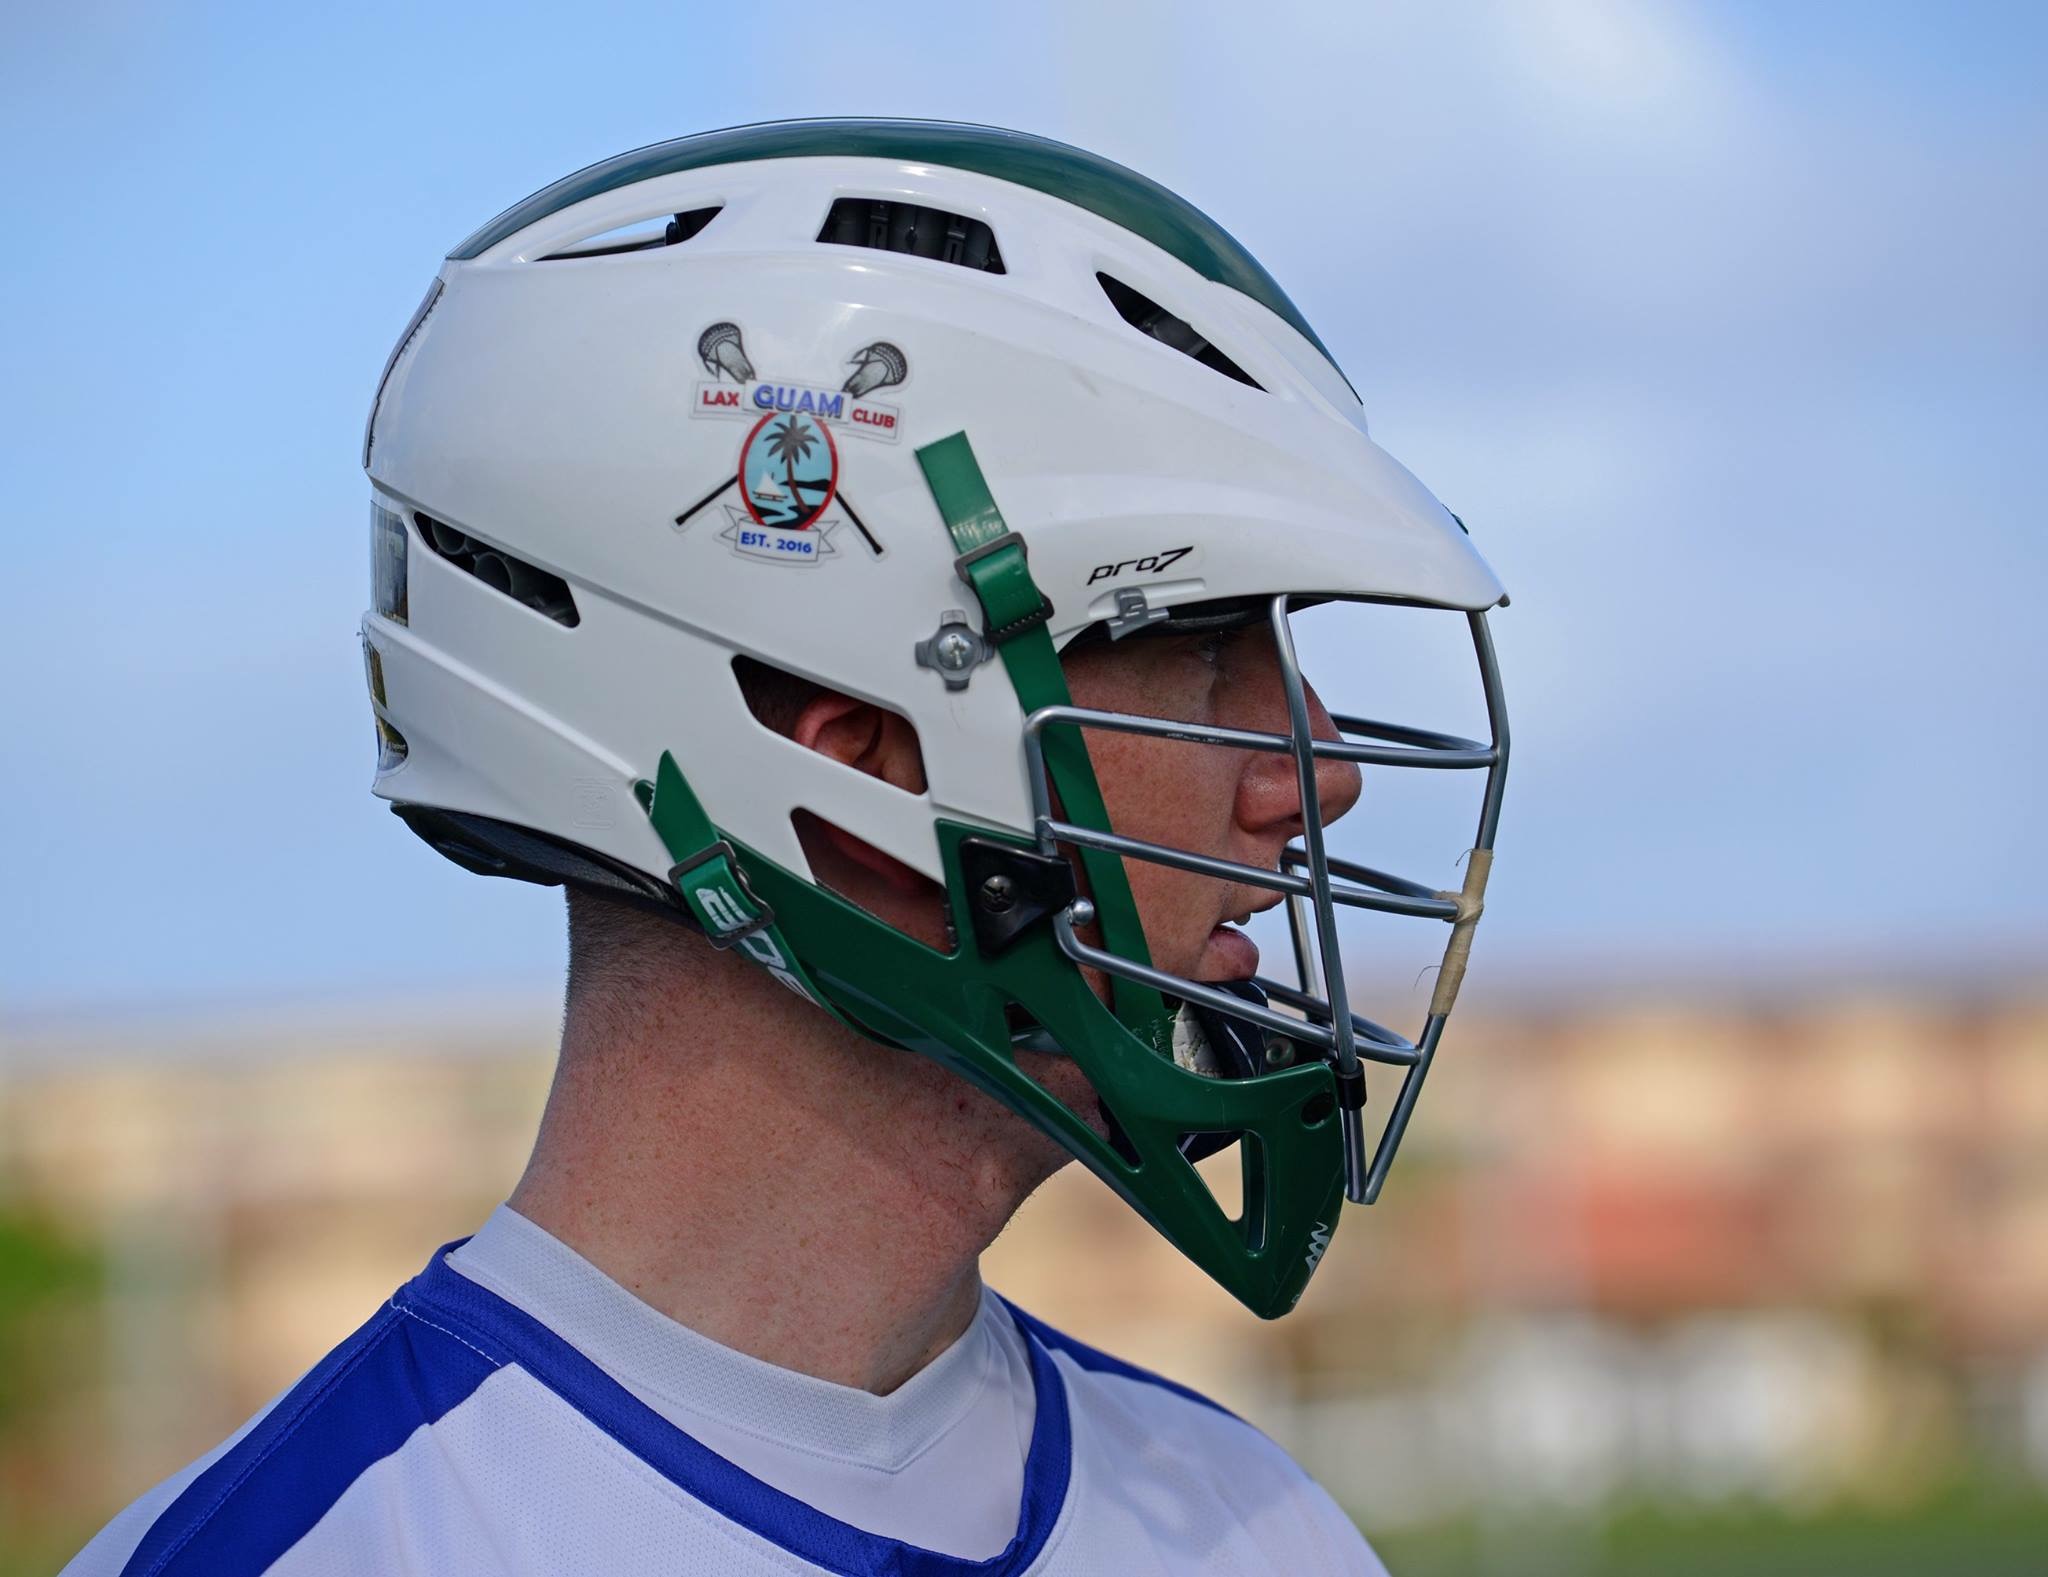 Overcoming PTSD through lacrosse: An Open Letter from Sgt. Scarola to SFS Nation